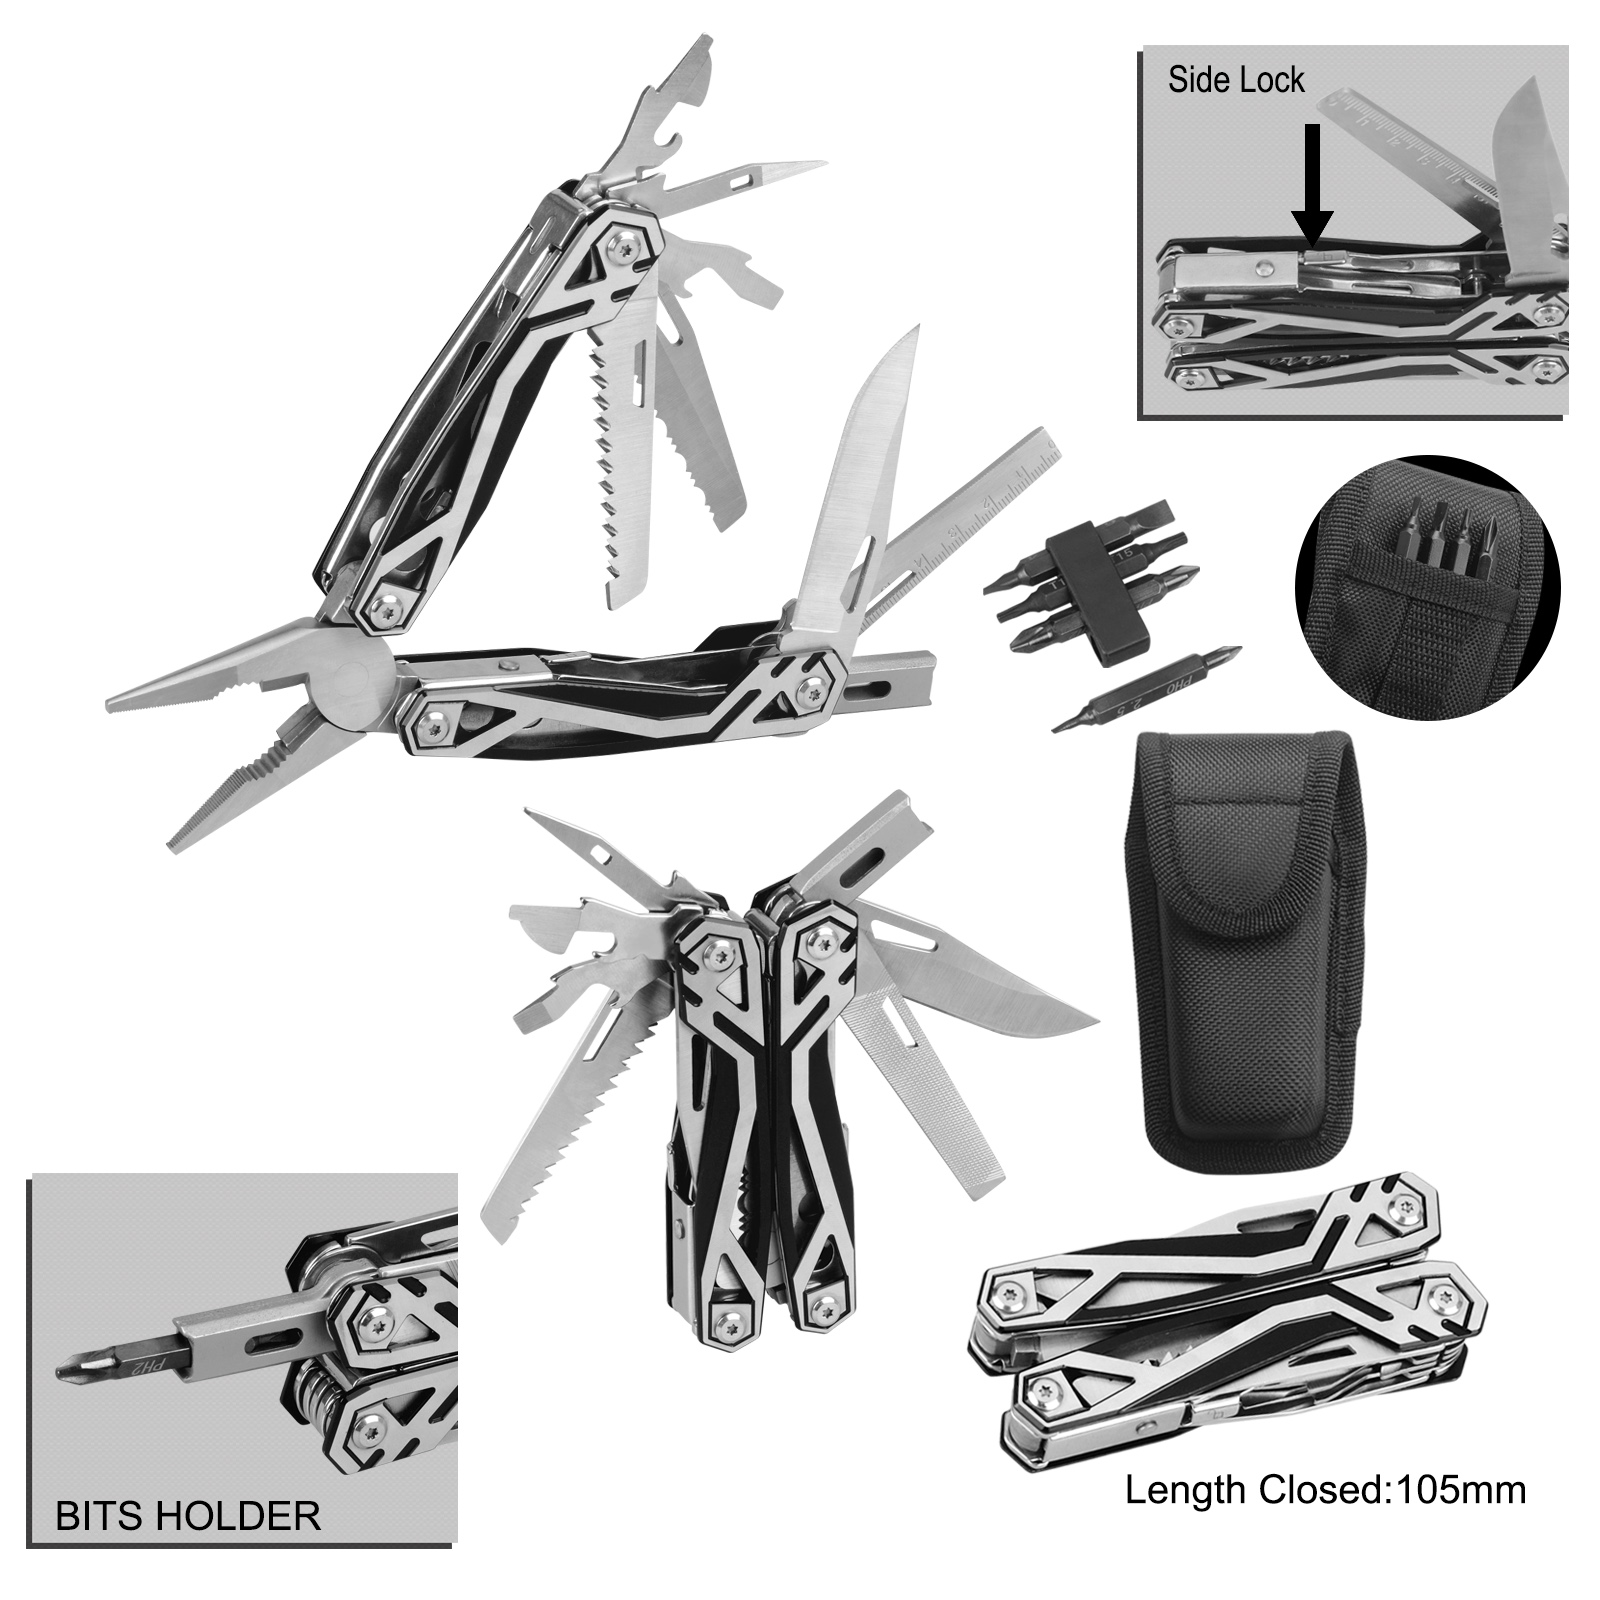 #8516 High Quality Multi Function Survival Pliers